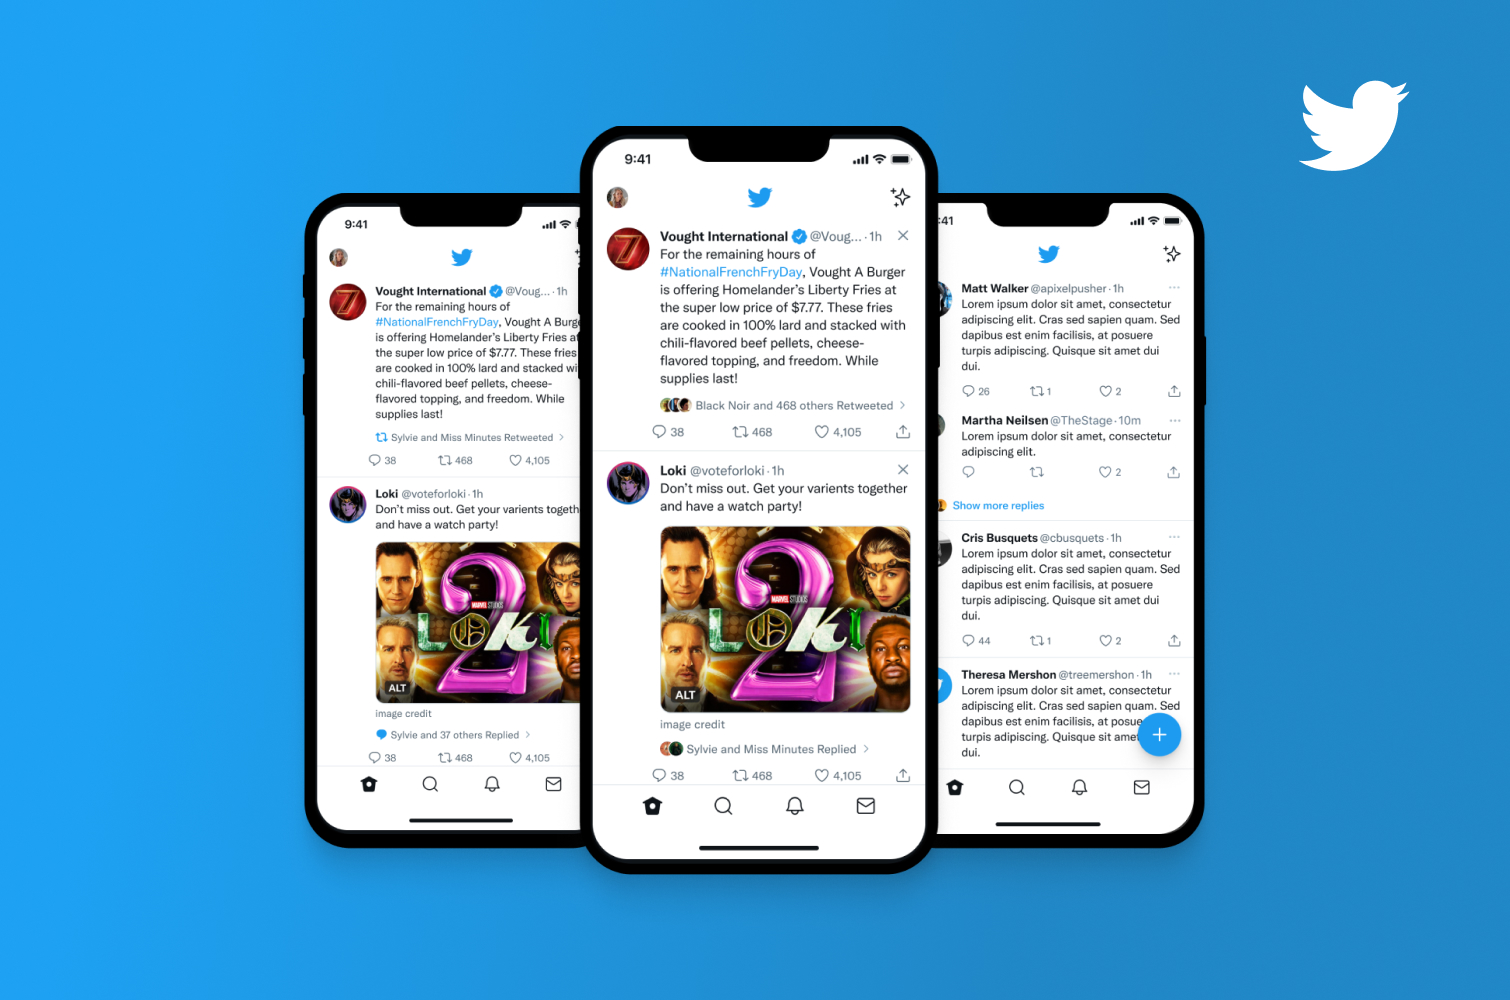 Twitter app with updated designs